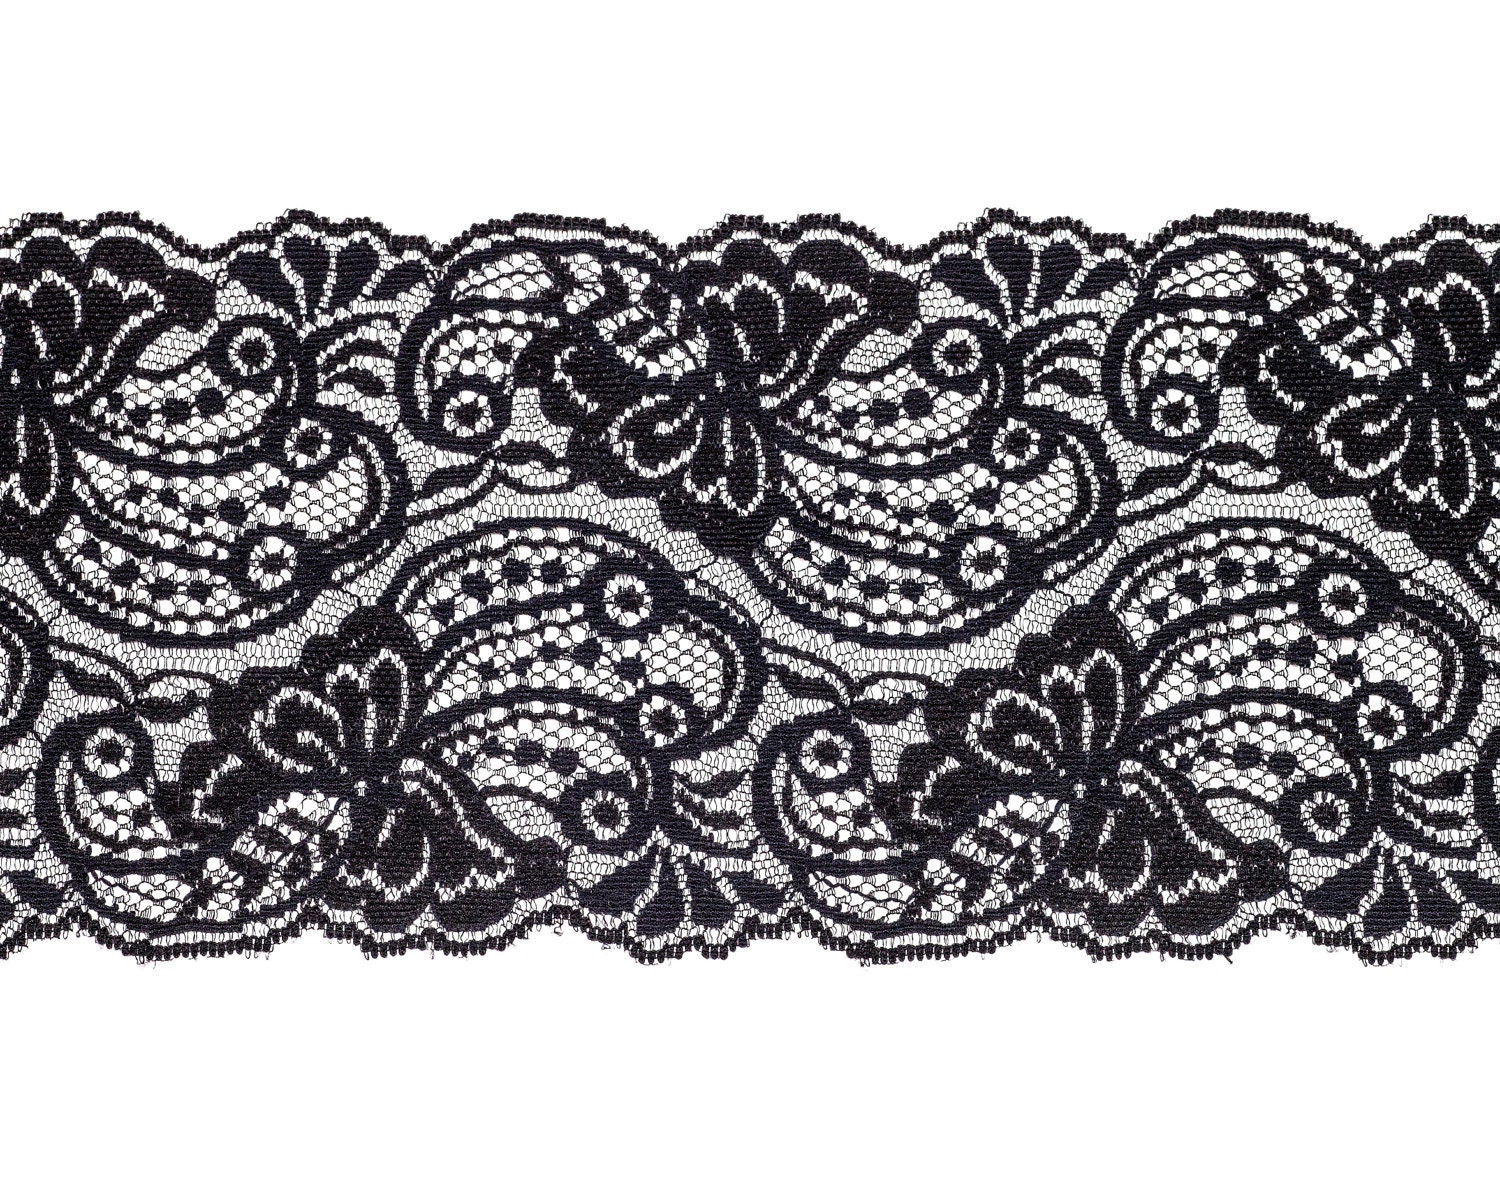 2 Yards of Wide Vintage Black Lace Trim. by CosmosCoolSupplies